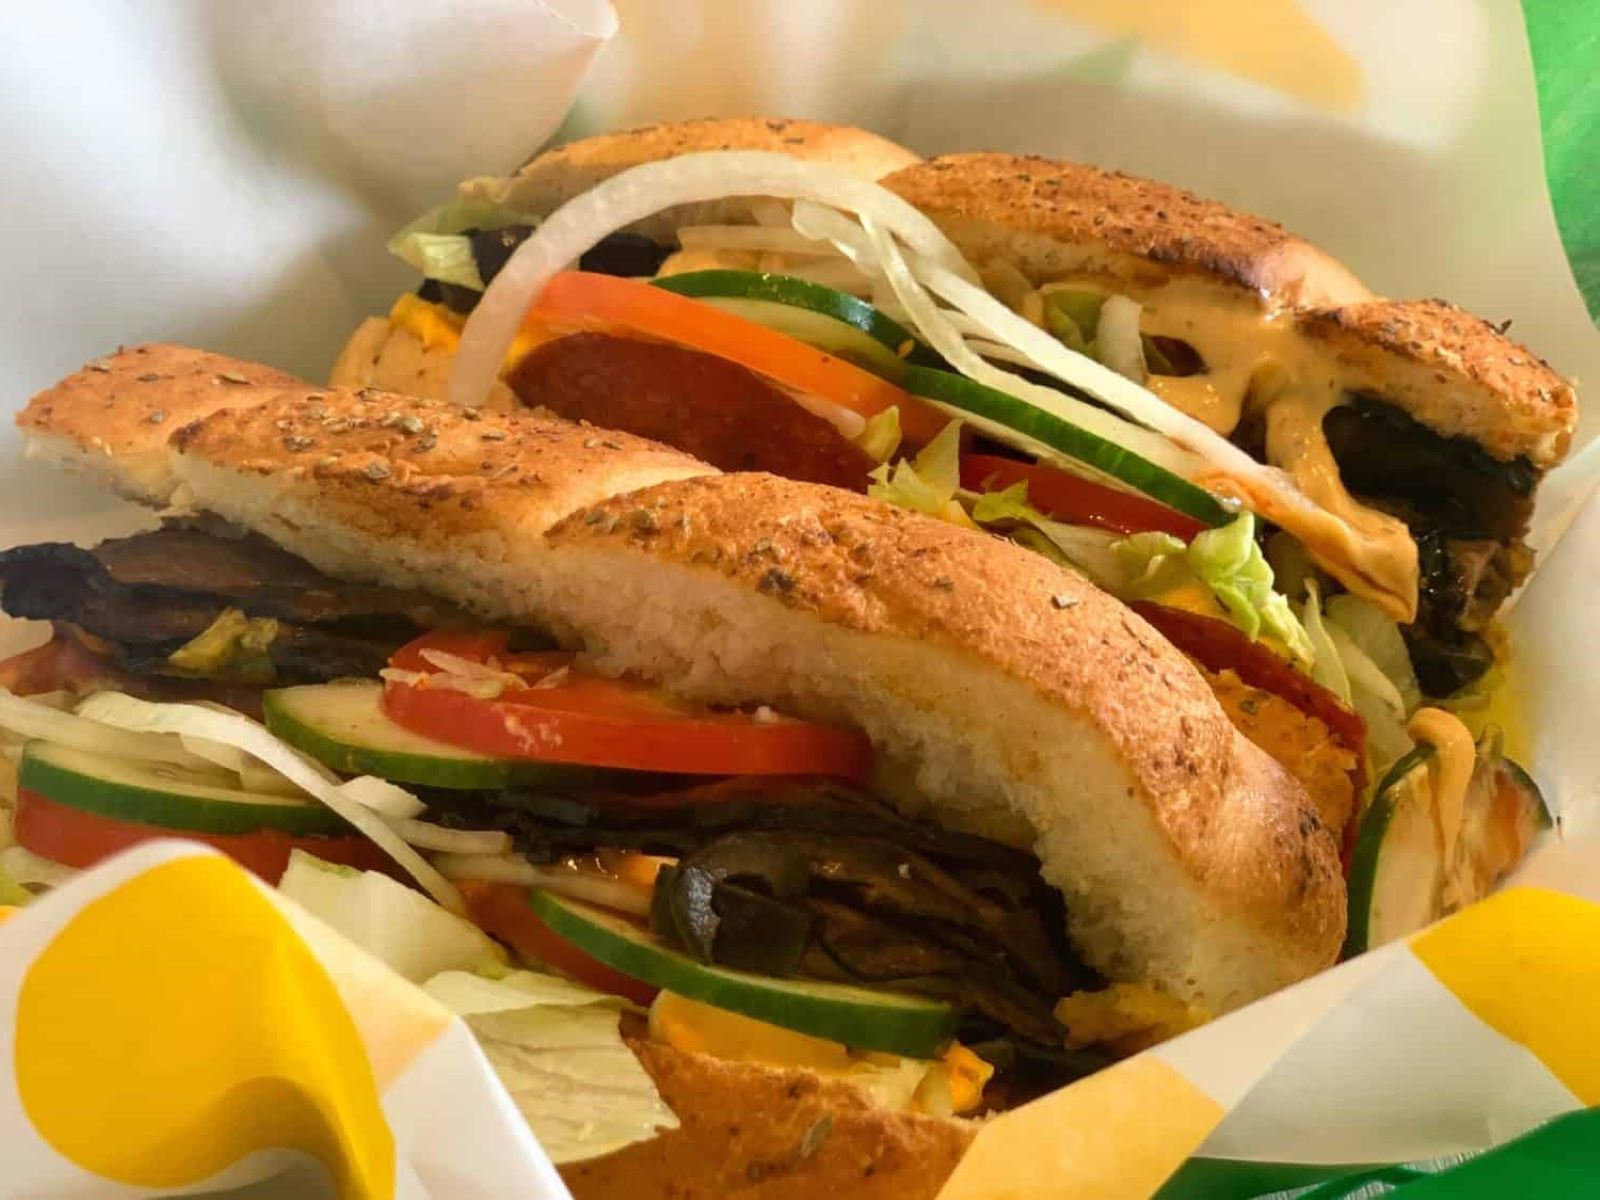 The Health Impact Of Subway: Exploring The Nutritional Value Of Italian Bread With Oven Roasted Chicken, Lettuce, And Mustard